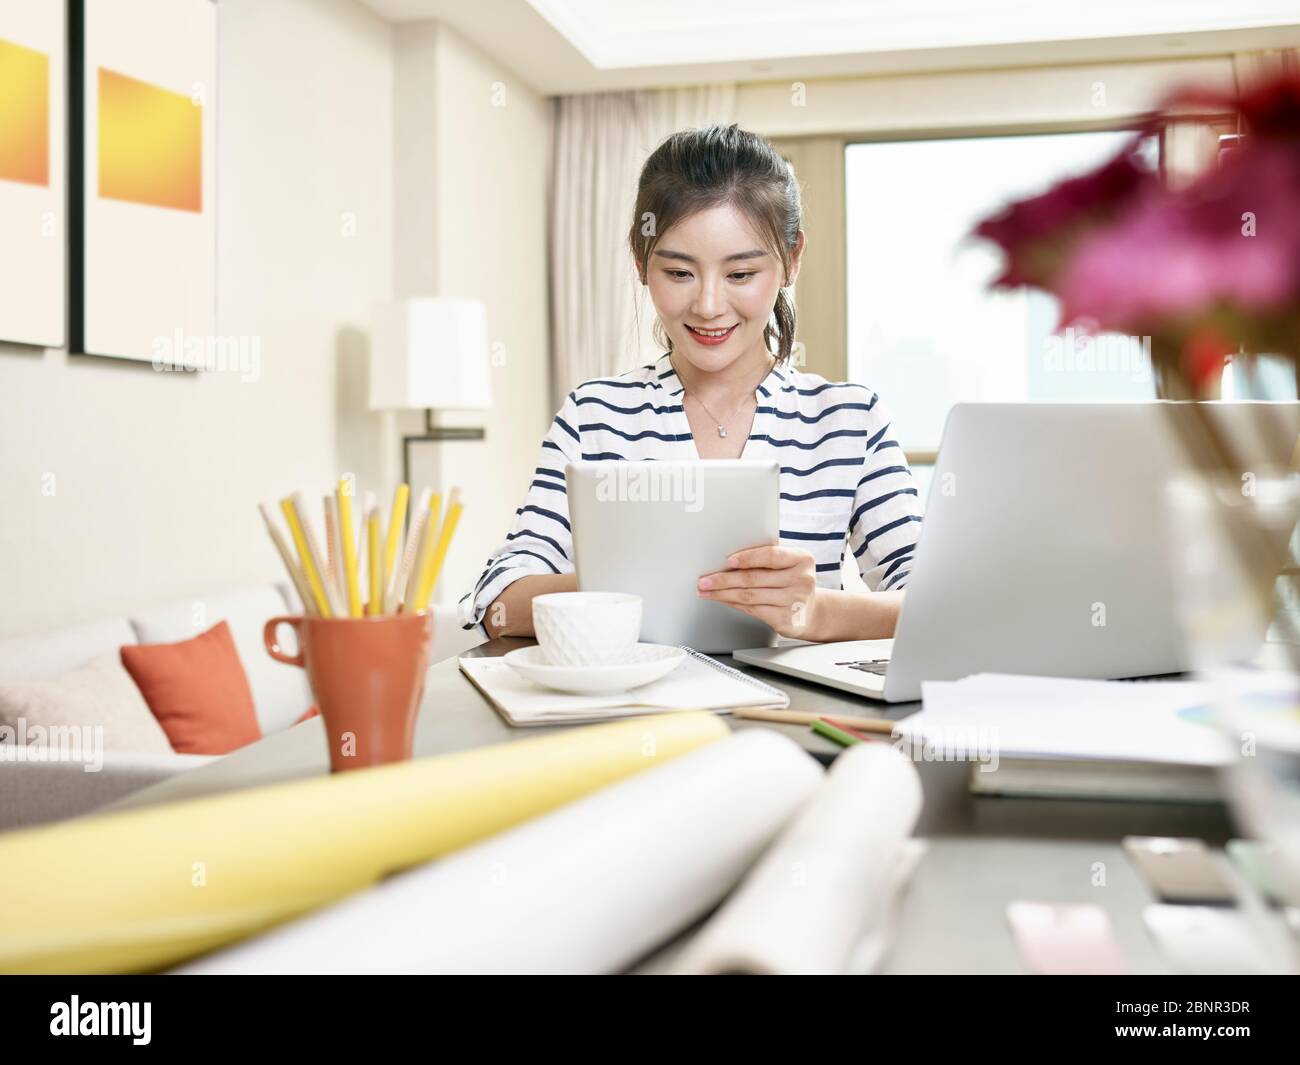 young asian business woman working at home using laptop computer and digital tablet (artwork in background digitally altered) Stock Photo